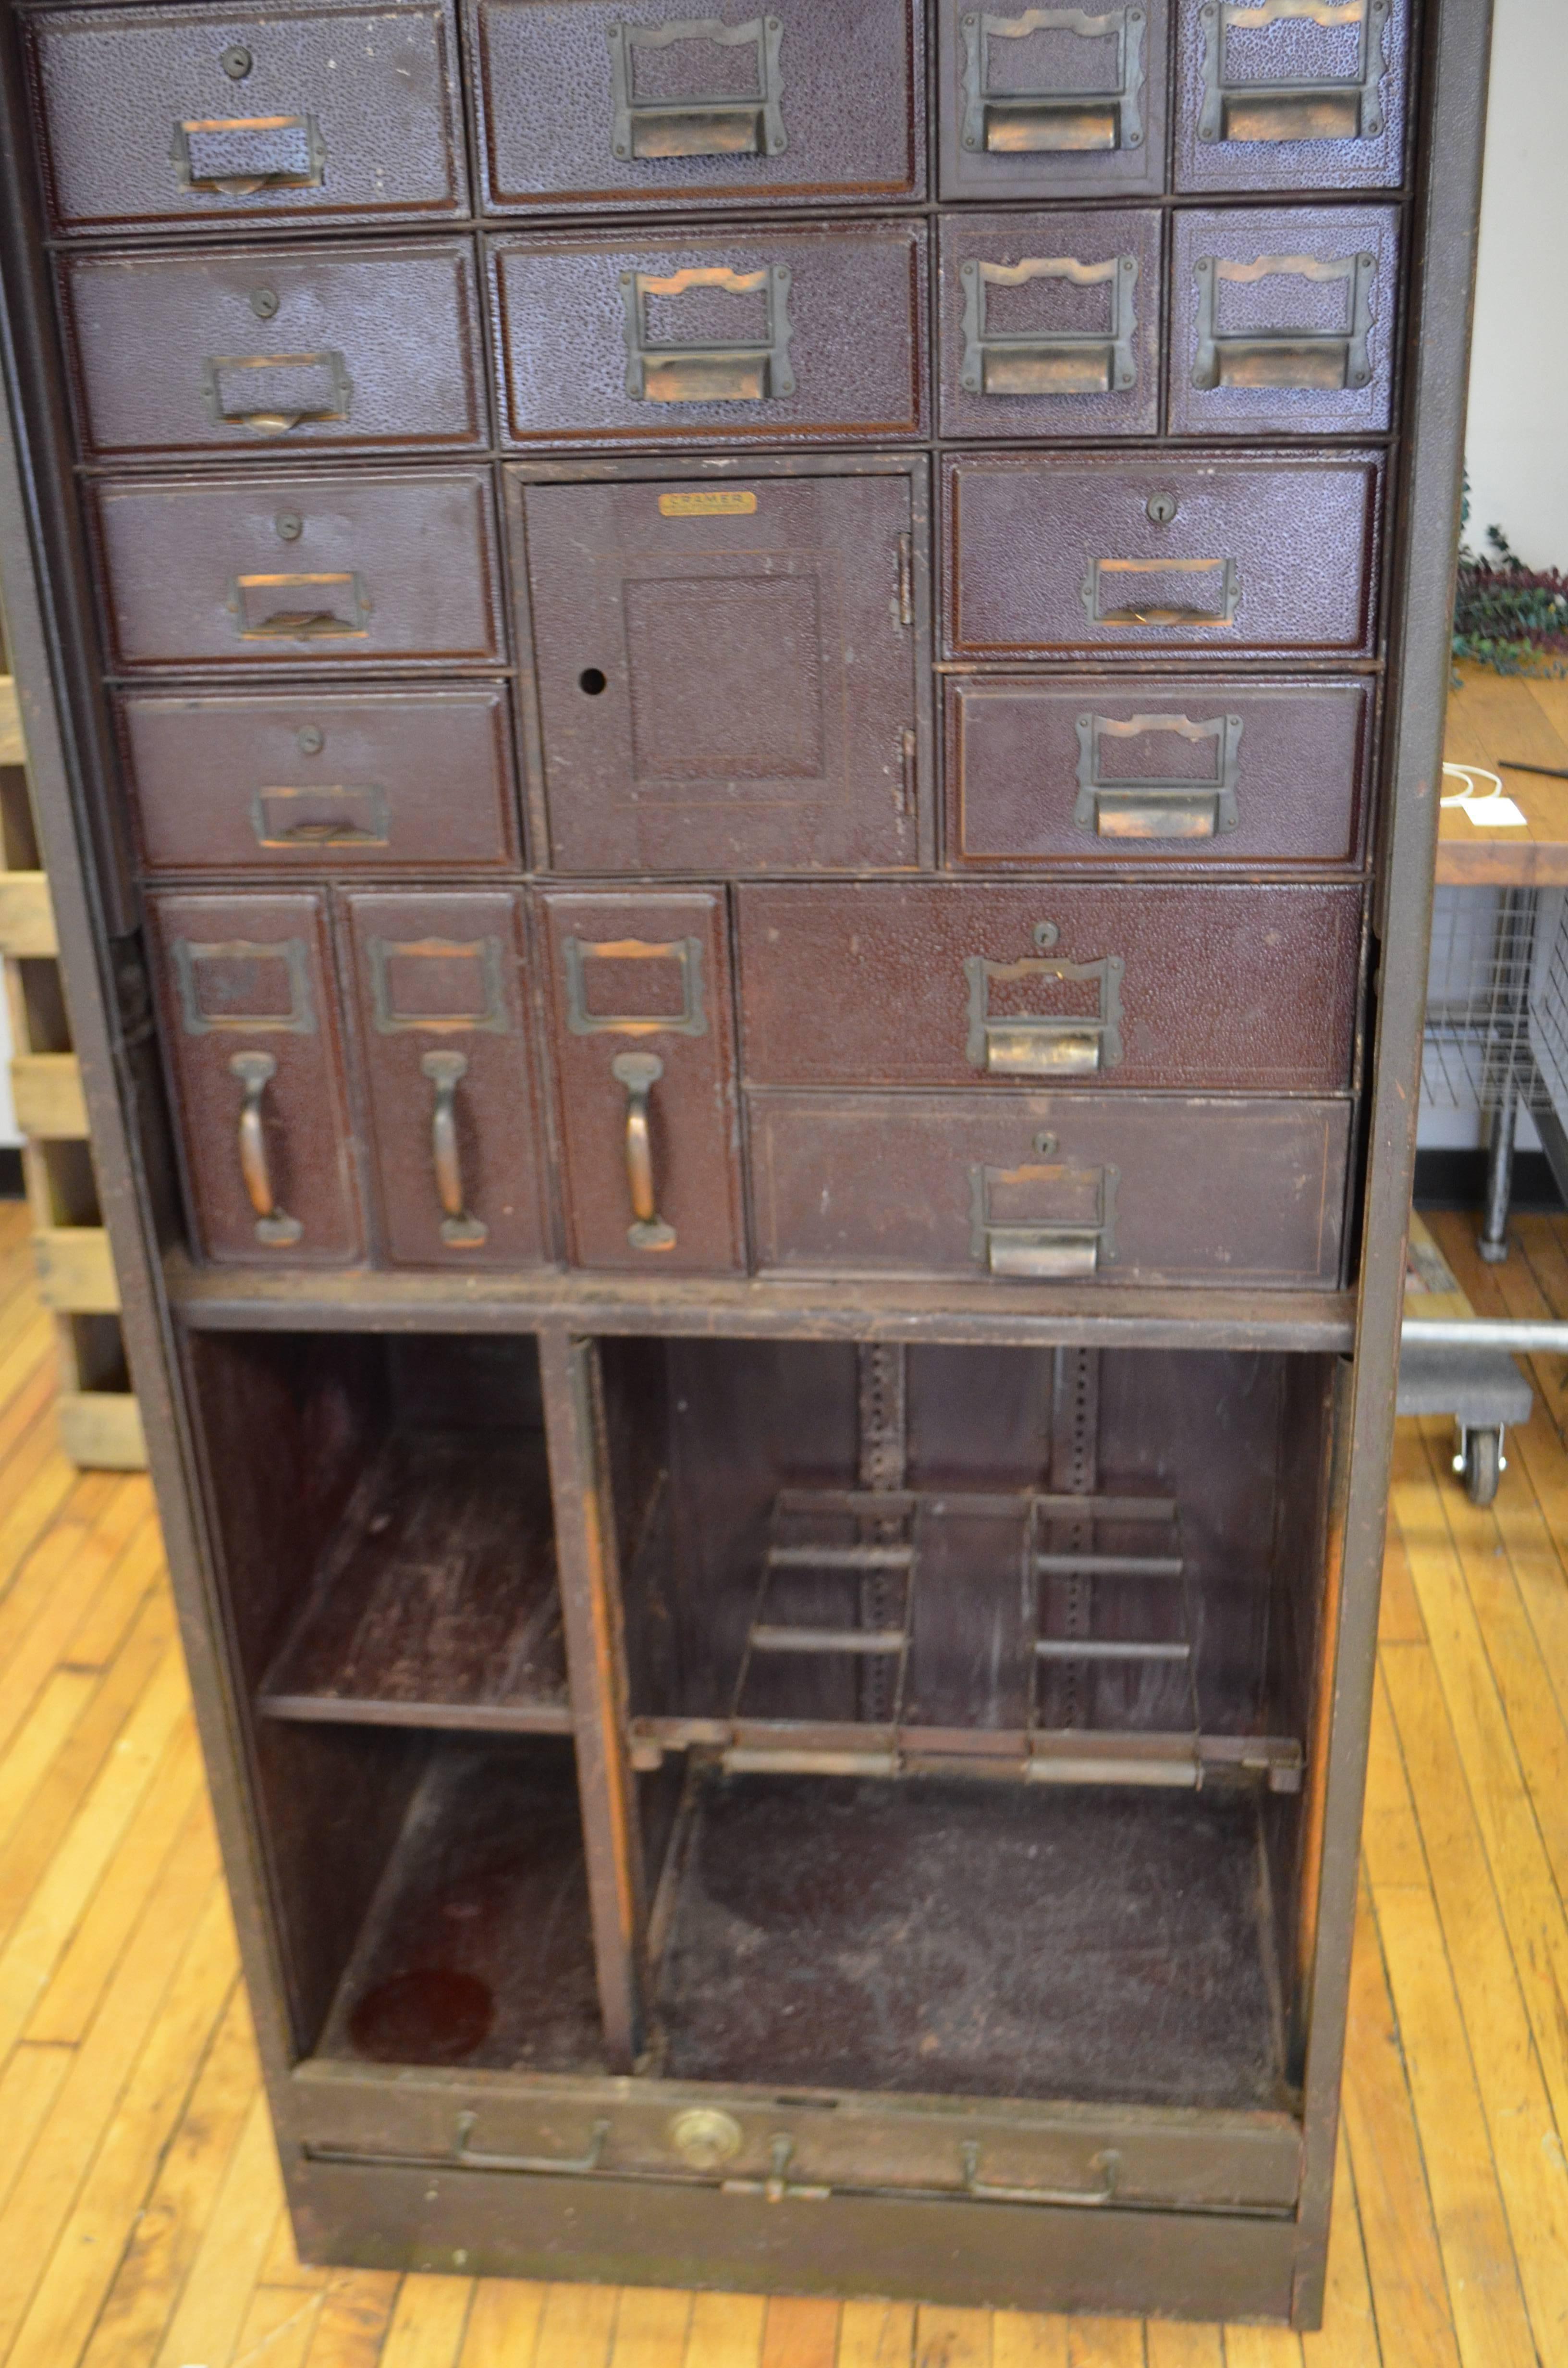 American Storage Steel Unit File Cabinet circa 1930s from Midwestern Post Office